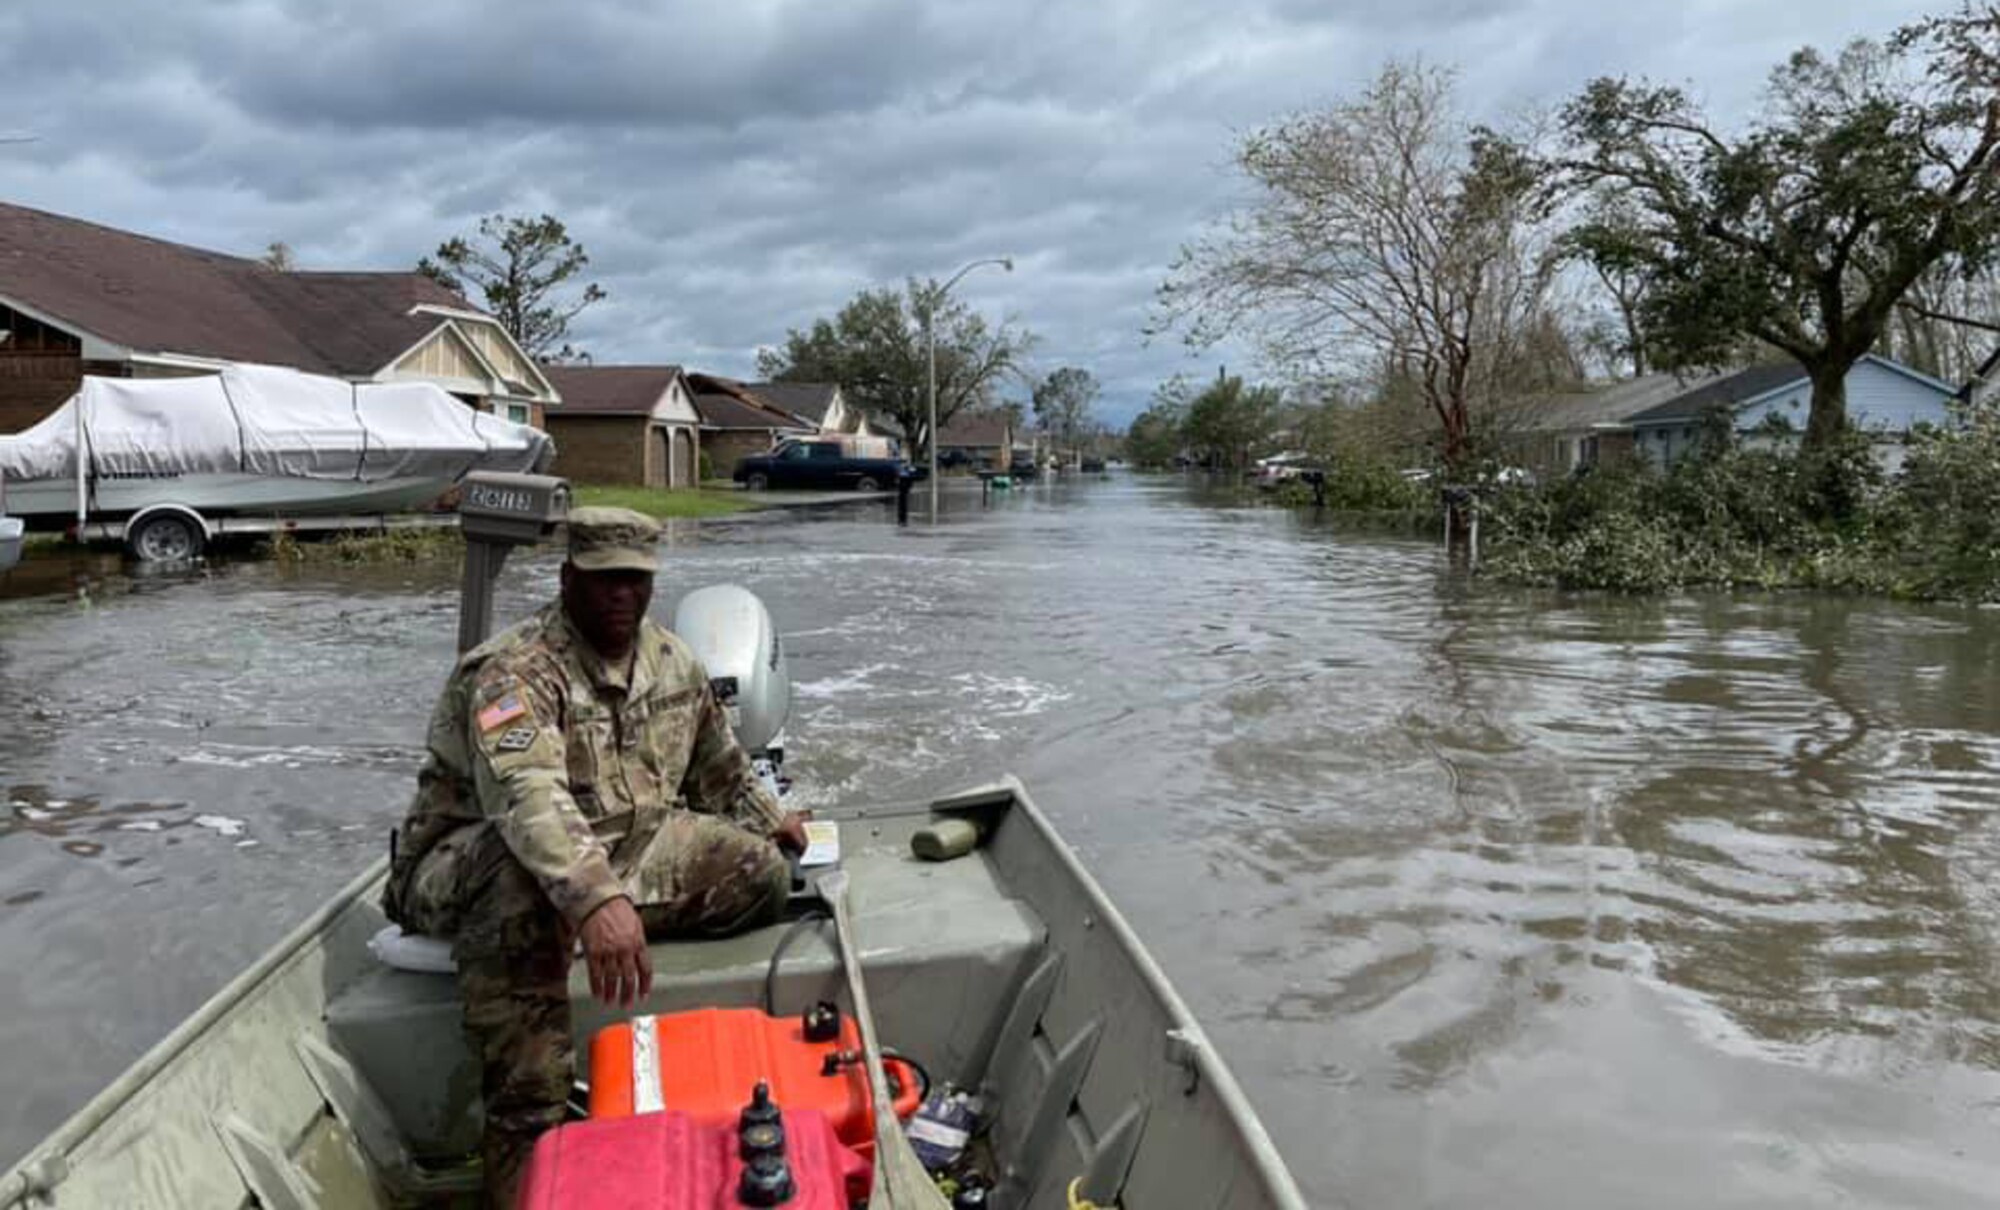 Louisiana National Guardsmen with the 922nd Engineer Vertical Construction Company helped rescue 135 people and four dogs in the flooded community of LaPlace, Louisiana, in the aftermath of Hurricane Ida, which made landfall in south Louisiana Aug. 29, 2021.